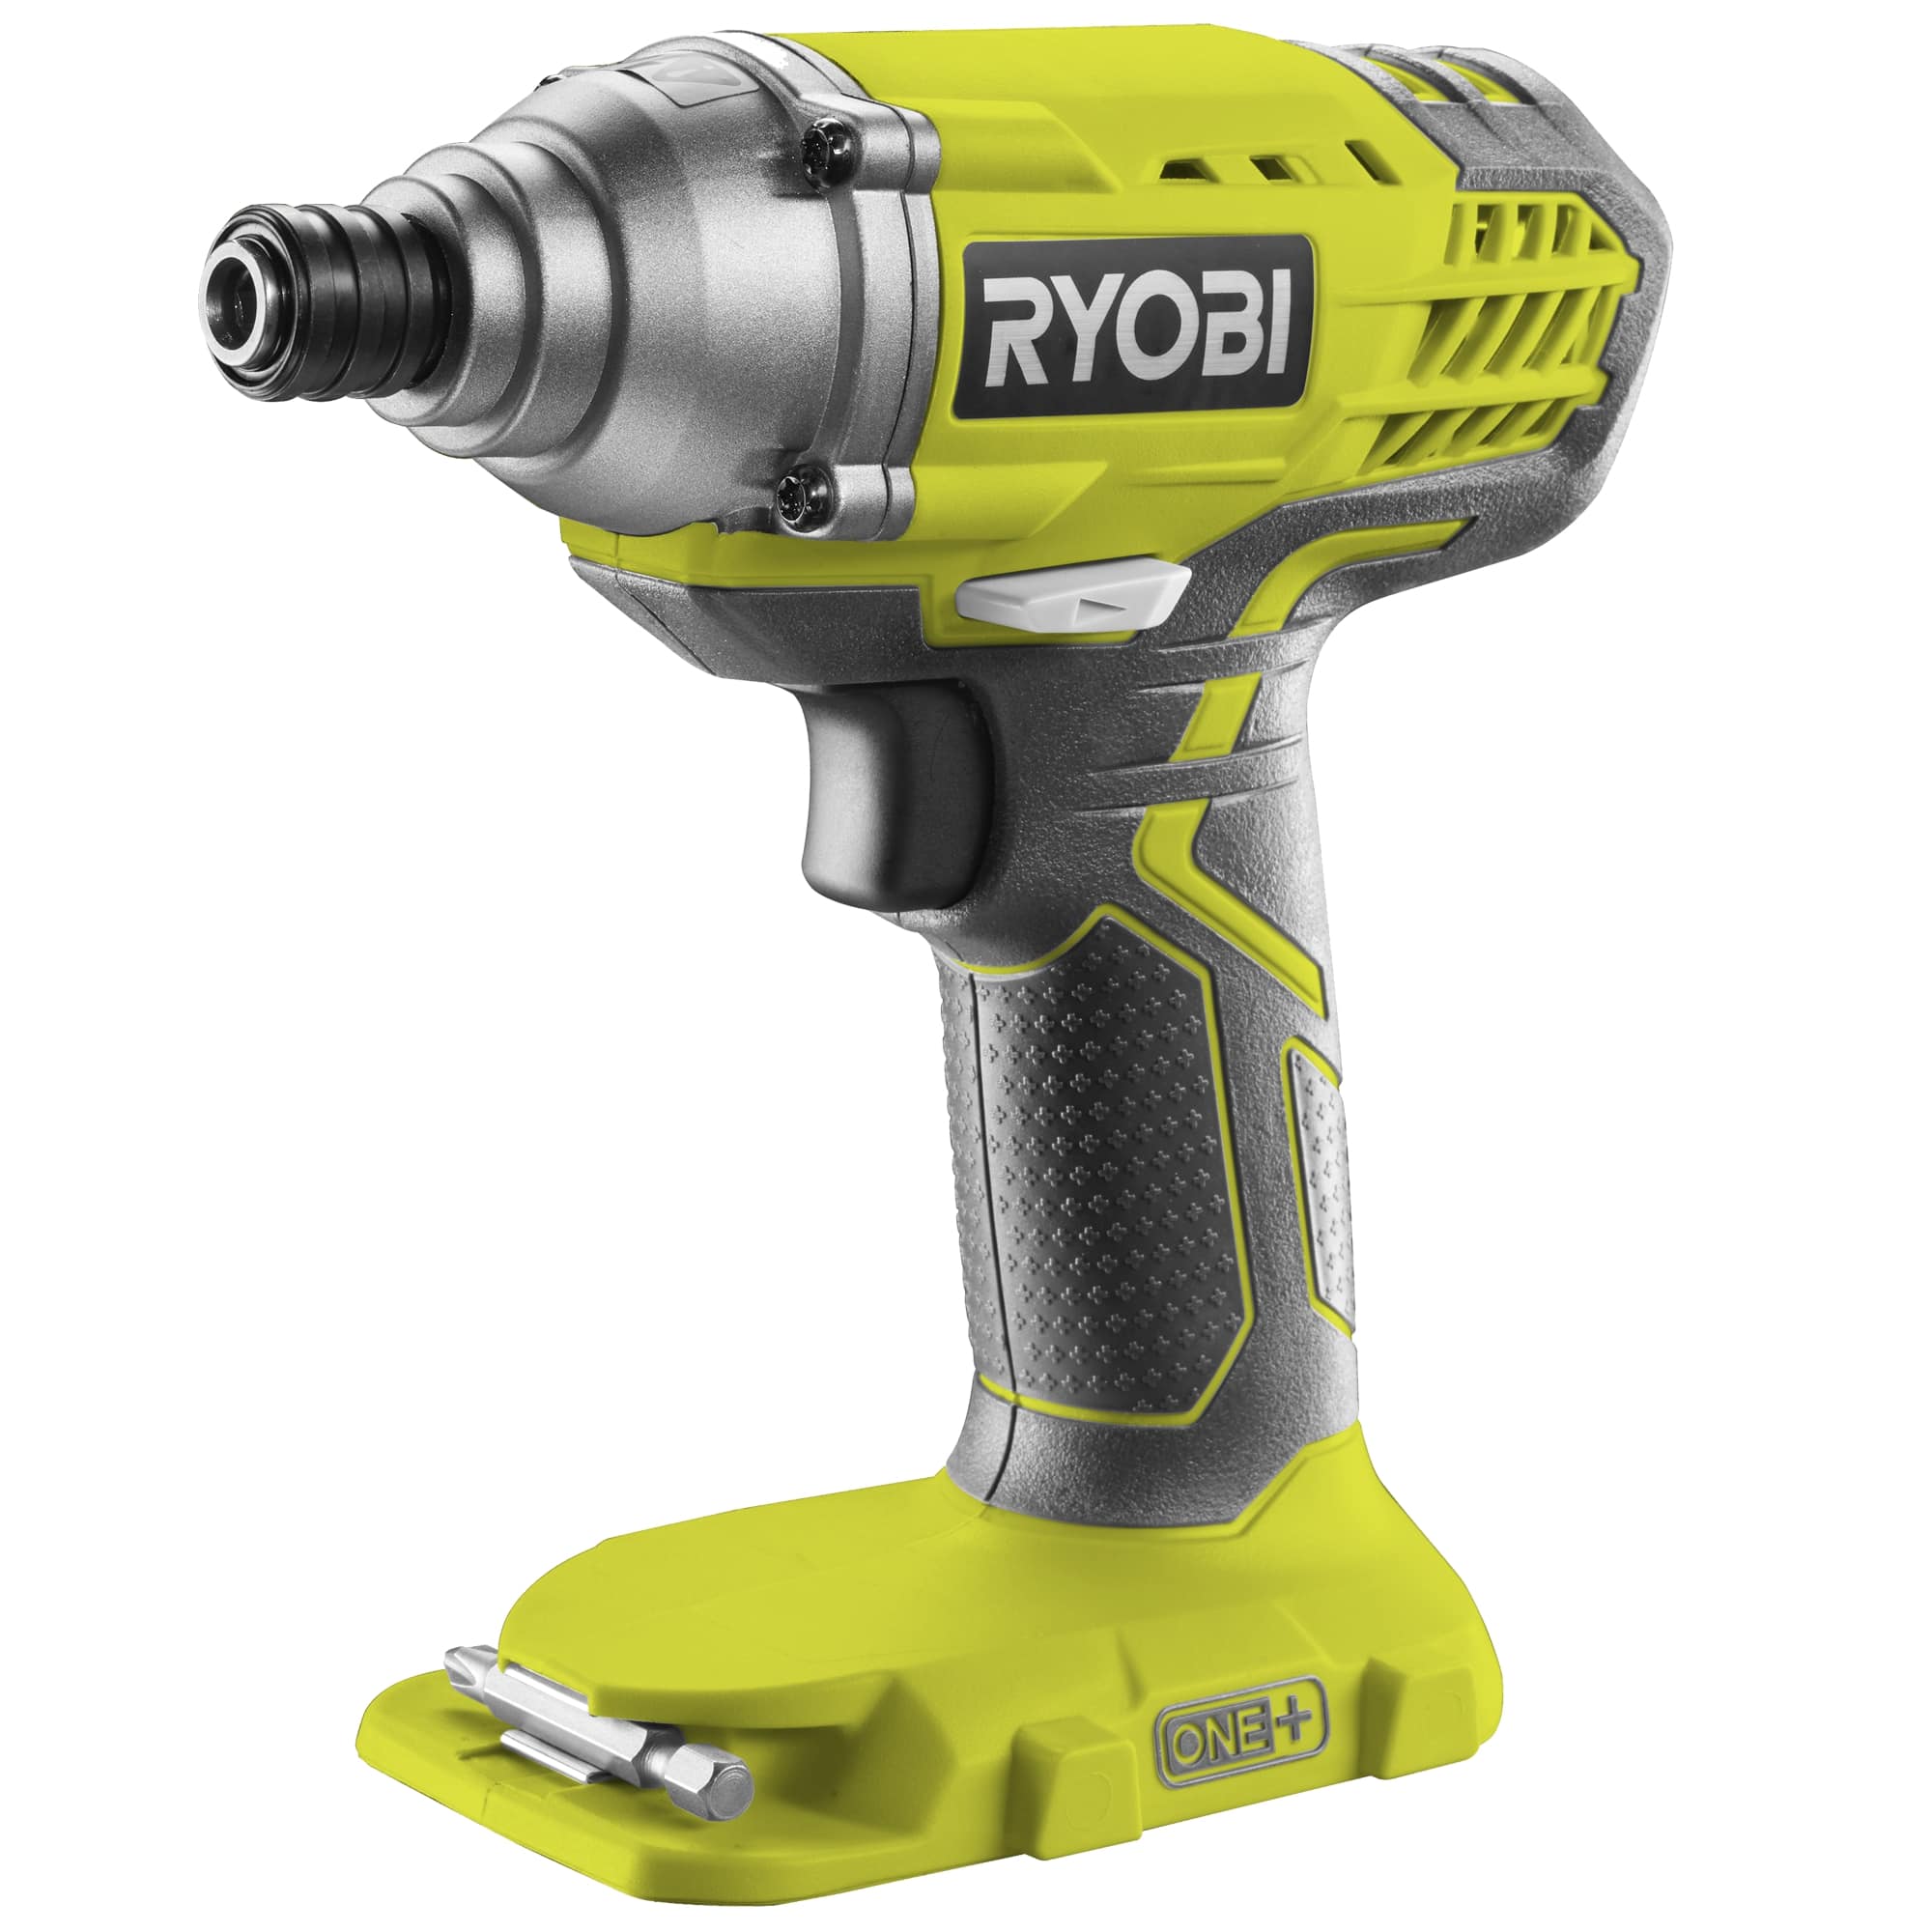 How To Remove Bit From Ryobi Impact Driver